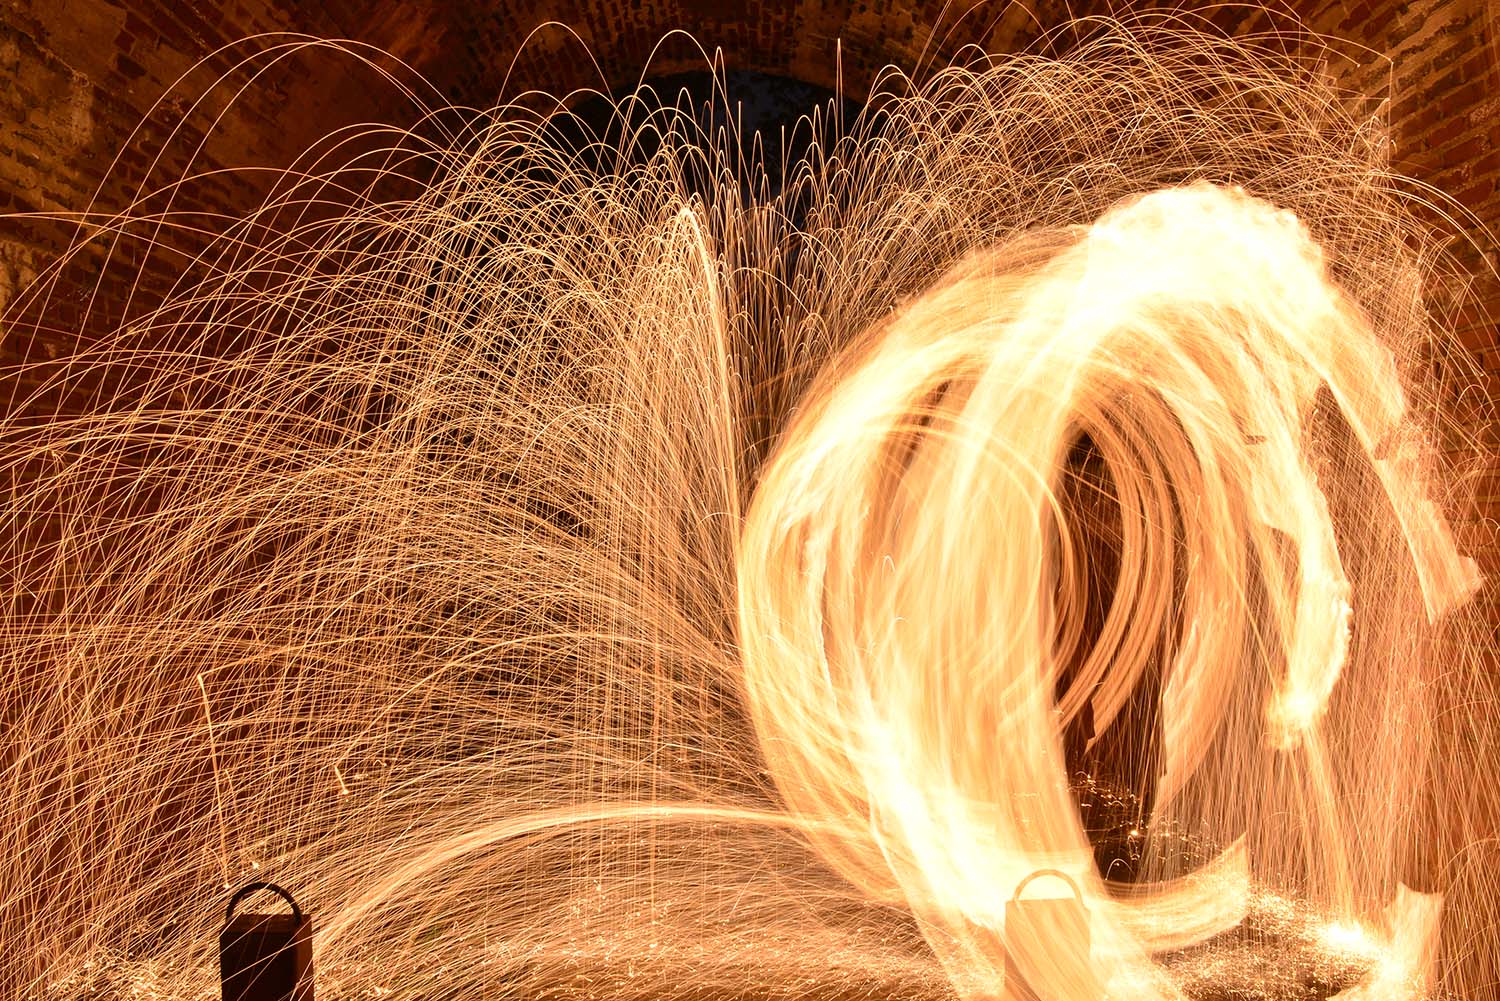 Spinning_Steel_Wool_Fire_Sparks_Long_Exposure_Tunnel_Light_Painting_Night.jpg